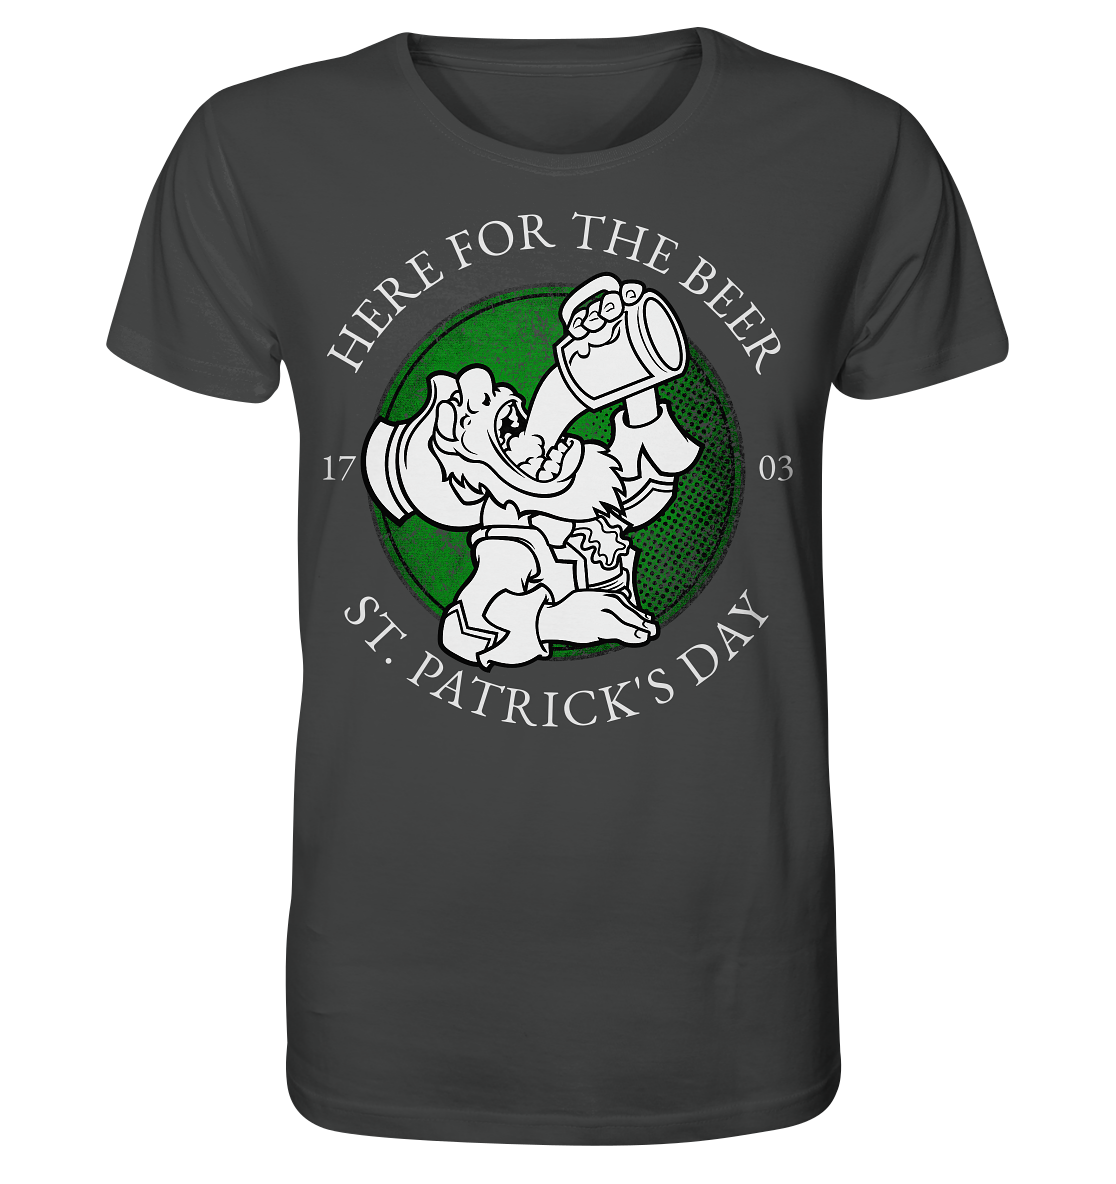 Here For The Beer "St. Patrick's Day" - Organic Shirt